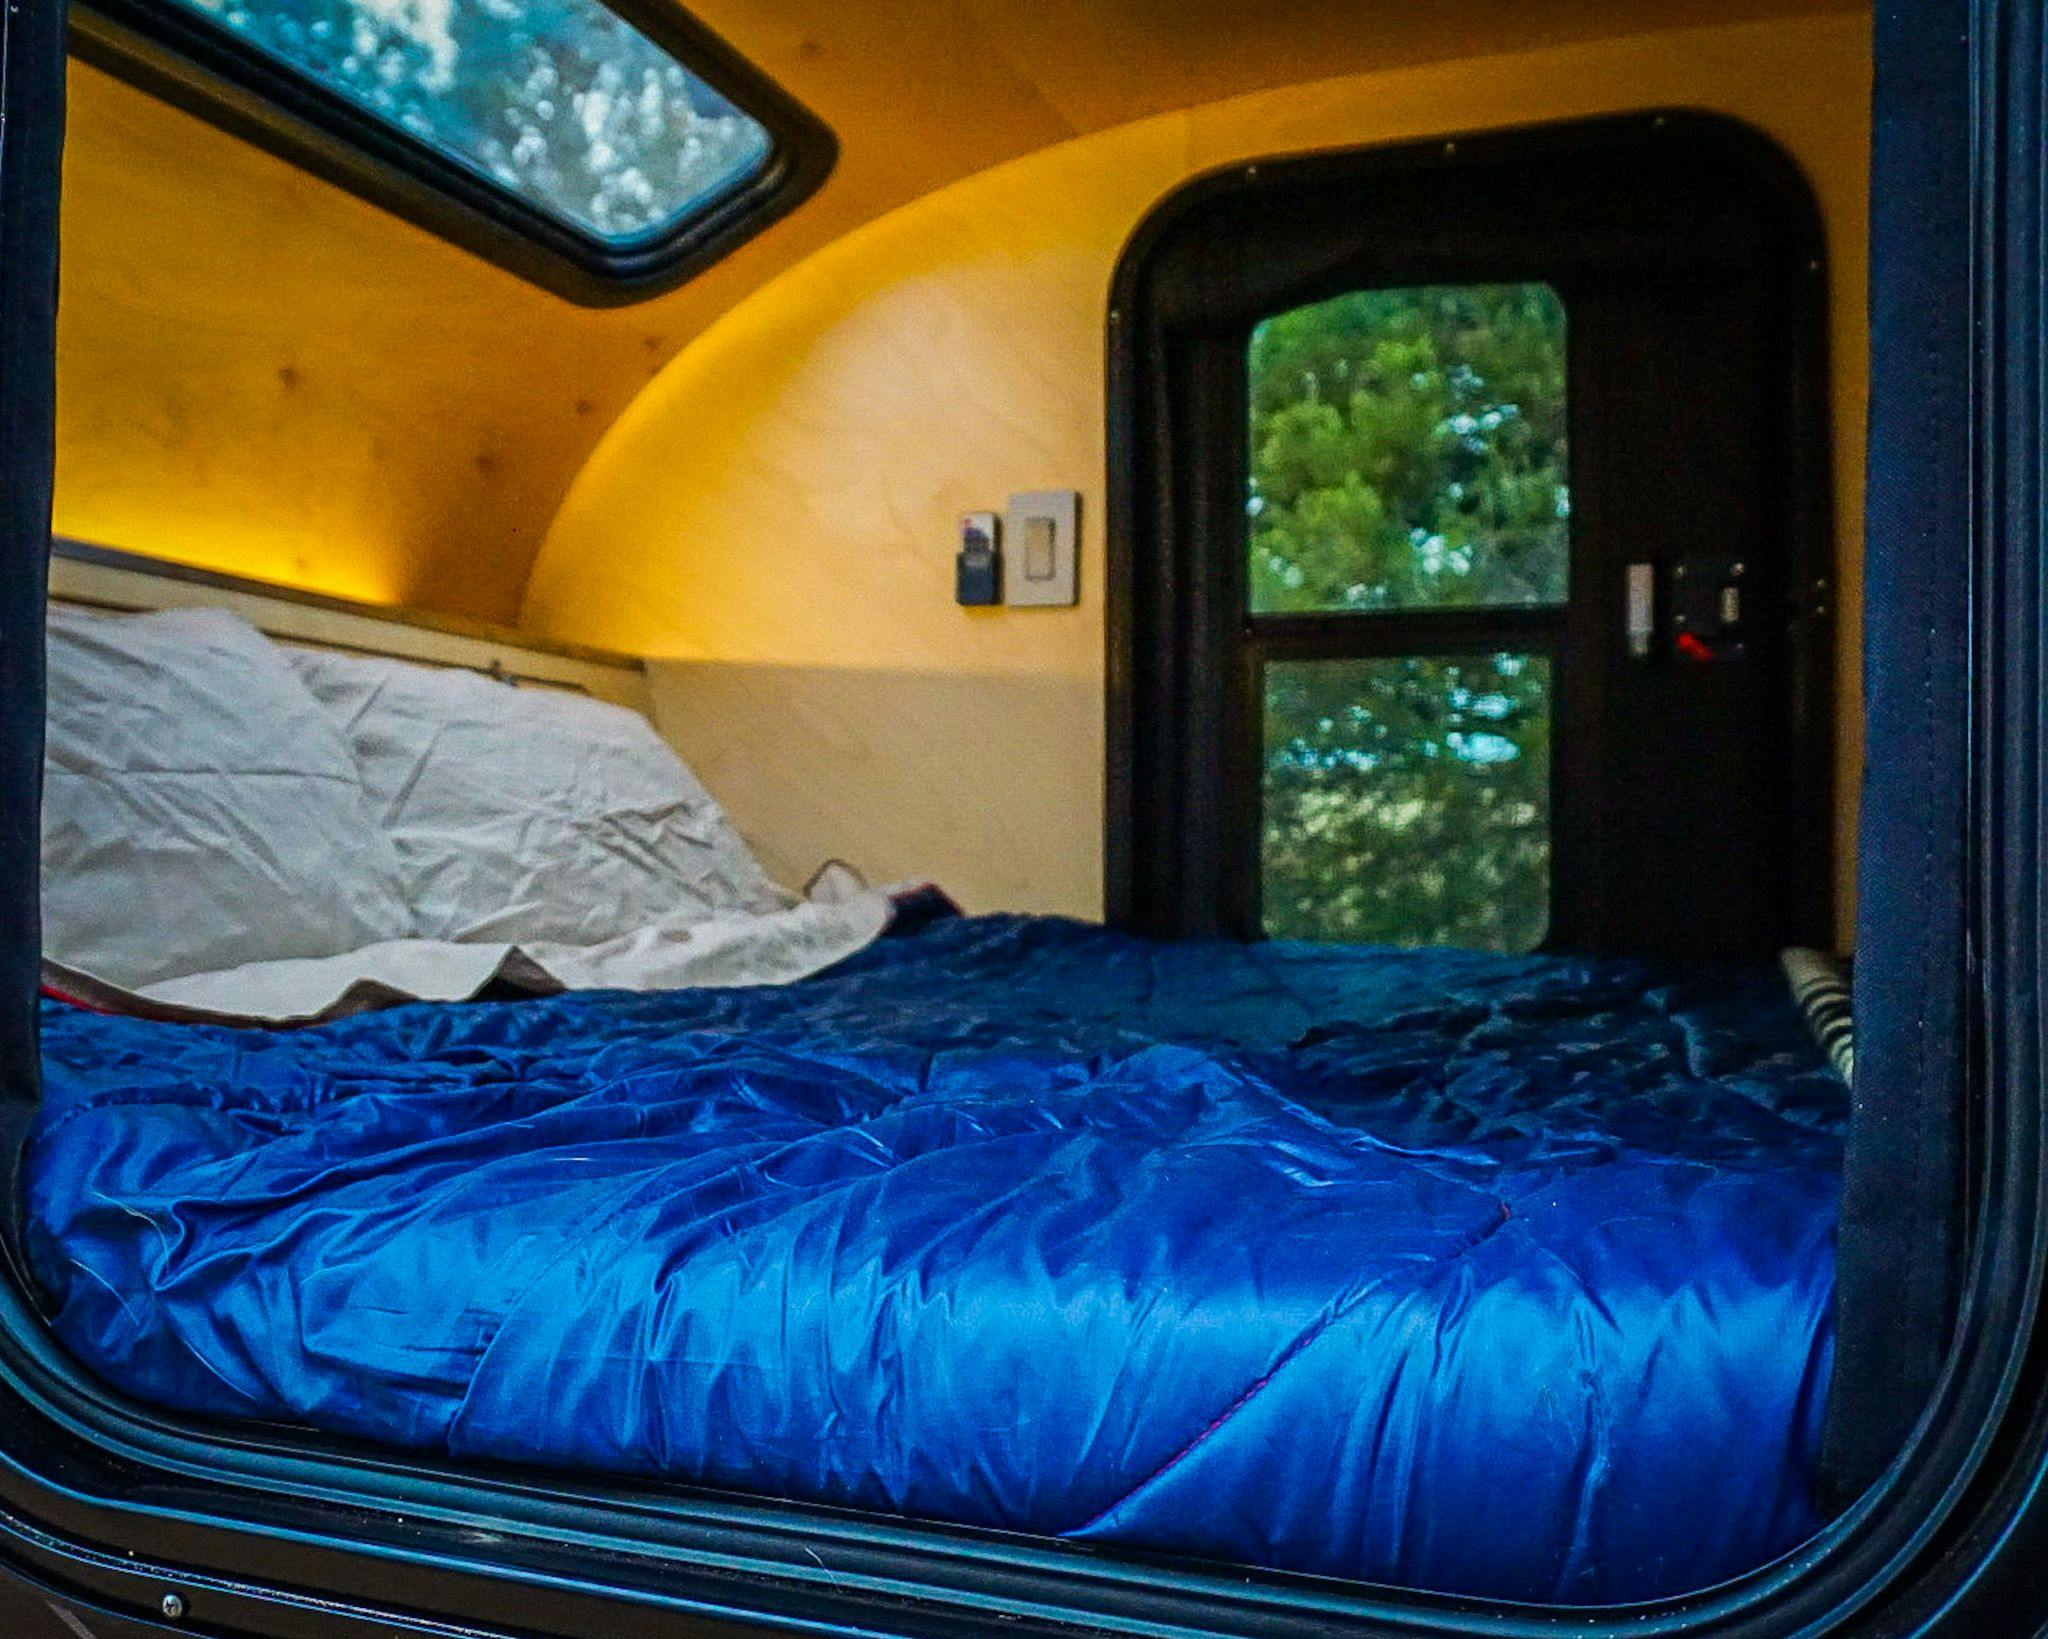 A calming picture displaying the interior of a teardrop trailer with a blue rumpl.